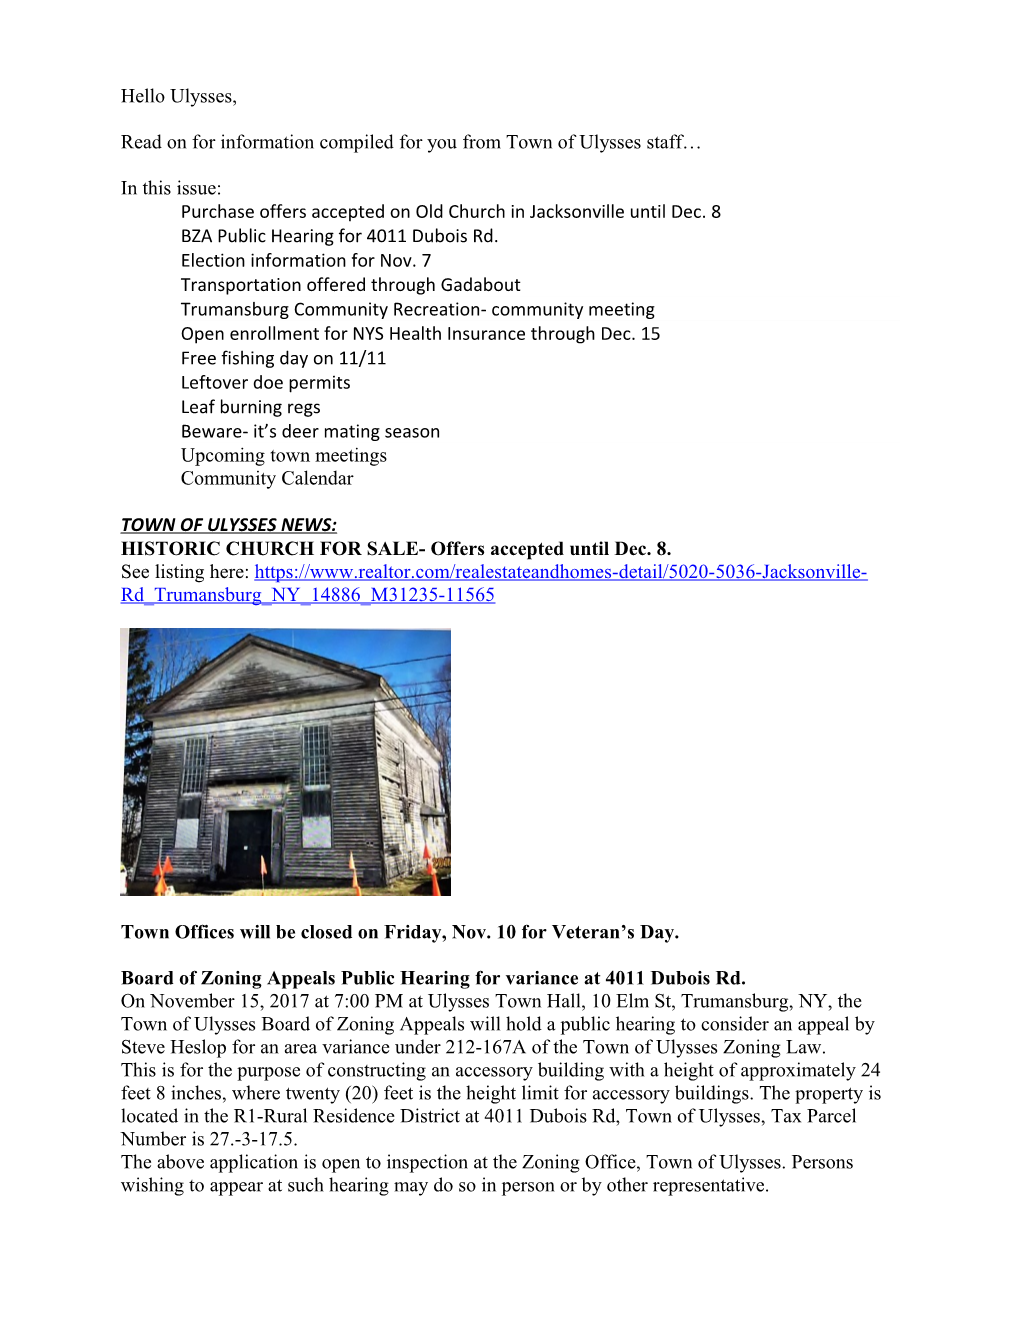 Read on for Information Compiled for You from Town of Ulysses Staff